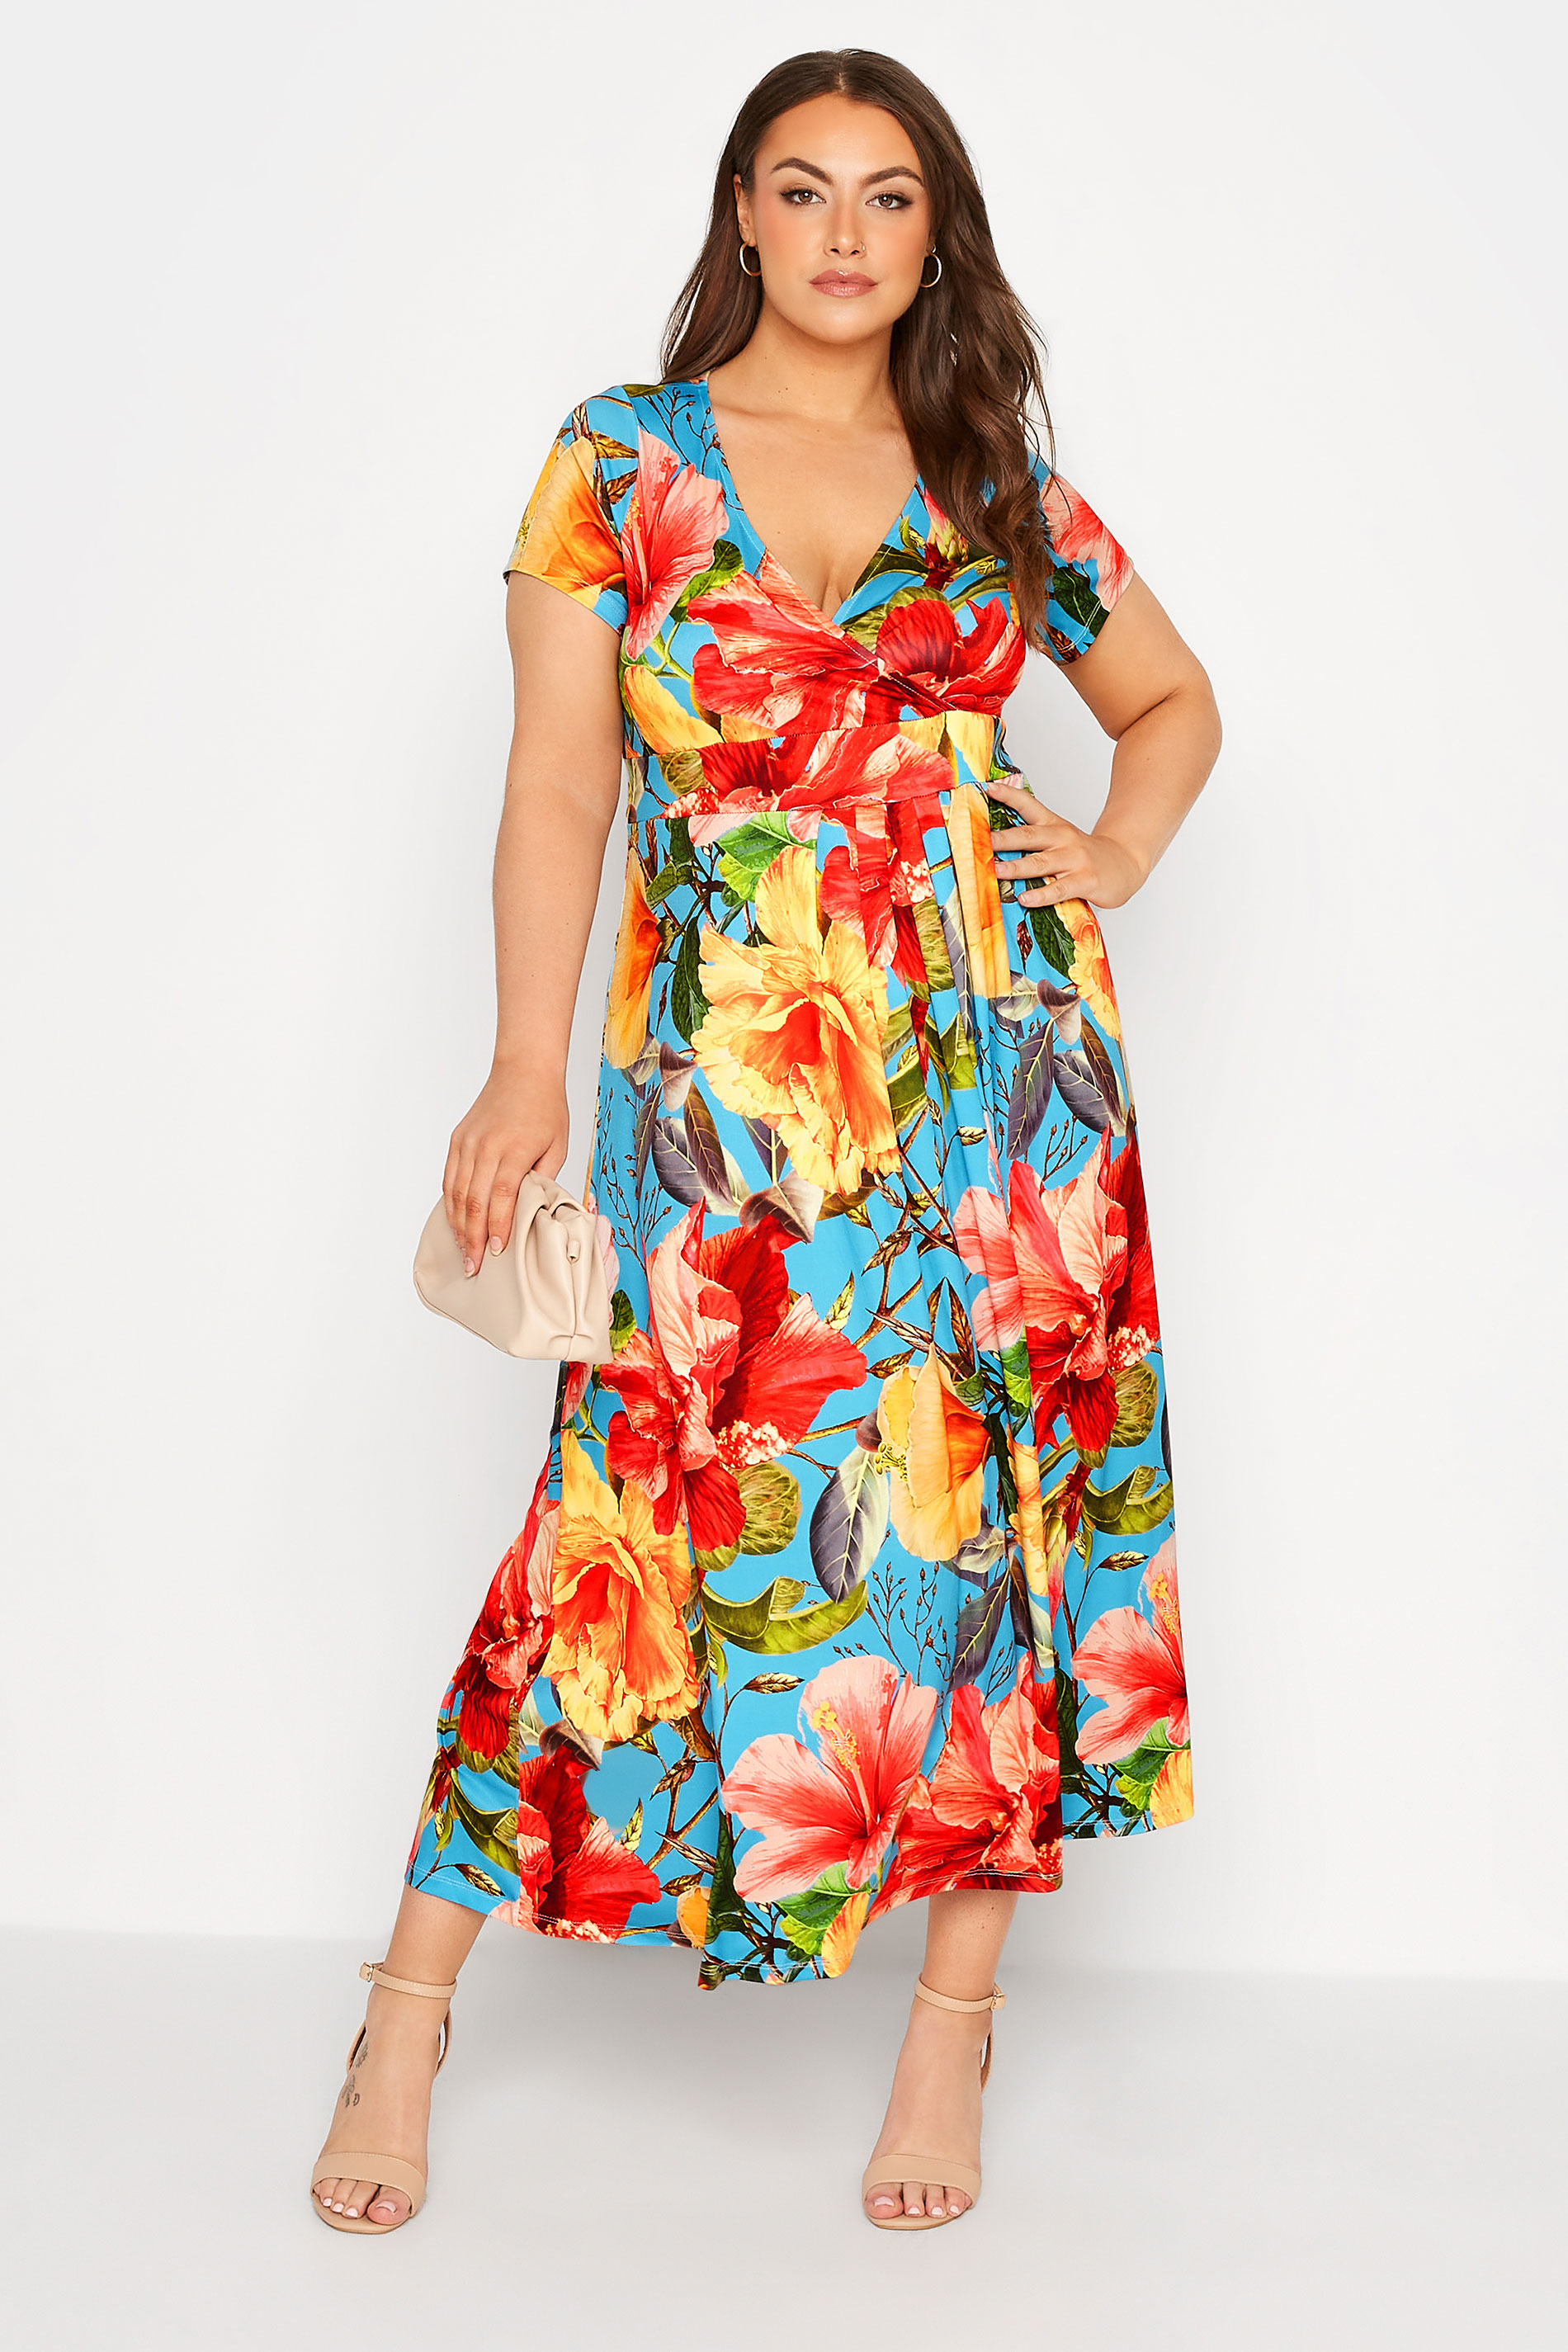 Robes Grande Taille Grande taille  Robes Portefeuilles | Robe Bleue & Rouge Floral Design Cache-Coeur - XP42778